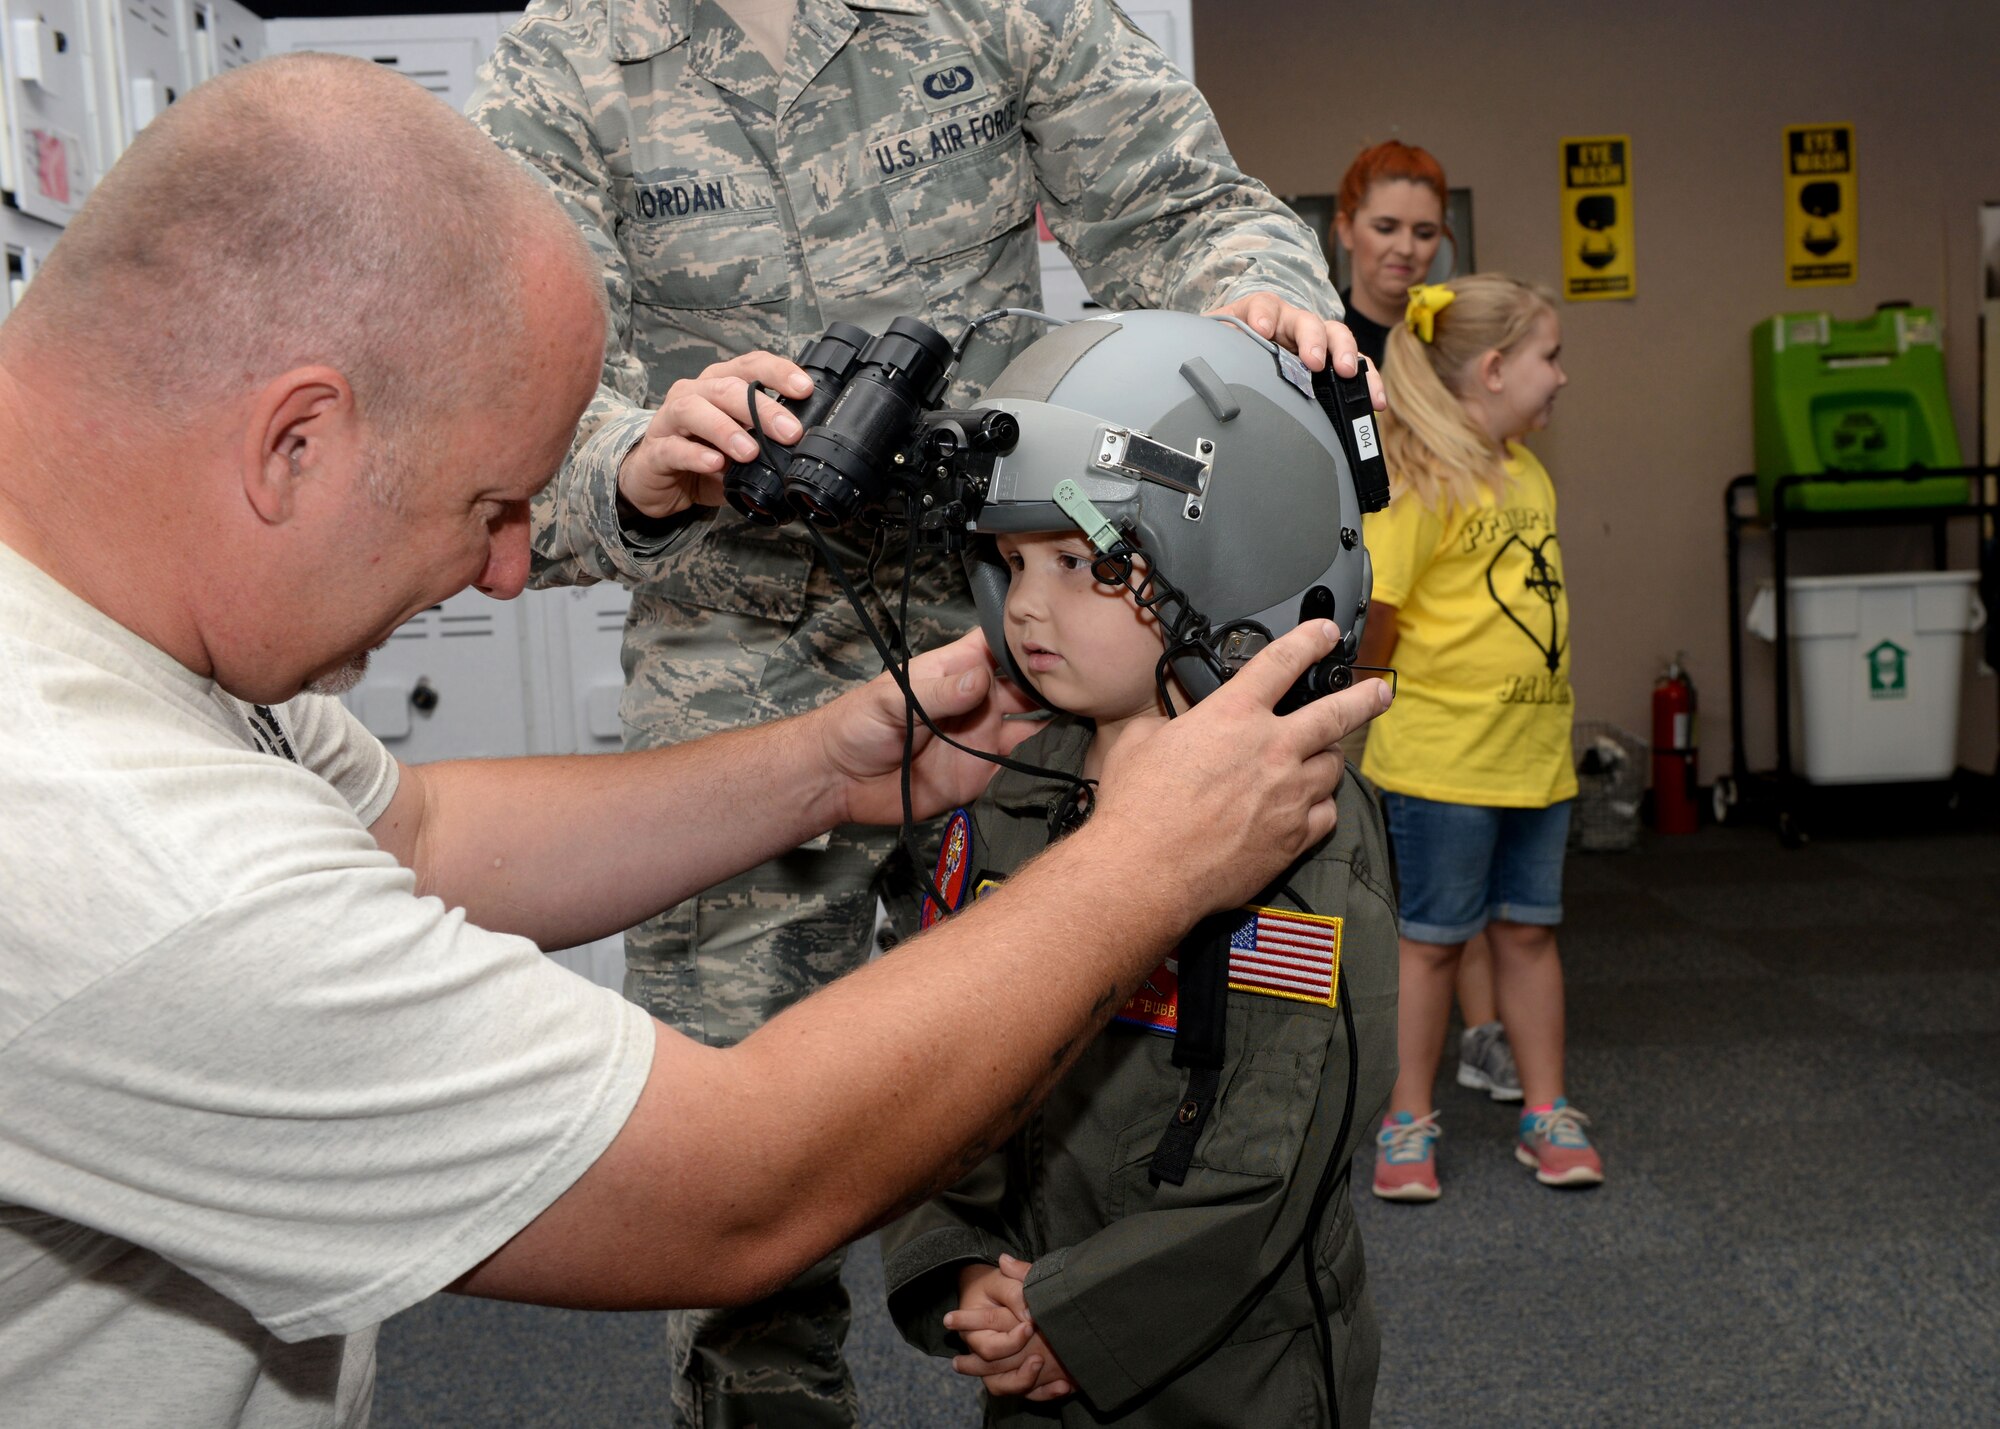 ALTUS AIR FORCE BASE, Okla. – Cody Dugger helps his son, Jaxon, put on a flight helmet equipped with nightvision goggles at the 97th Operations Support Squadron, June 26, 2015. Jaxon was diagnosed with Ewing’s sarcoma when he was two years old. (U.S. Air Force photo by Airman 1st Class Kirby Turbak/Released)